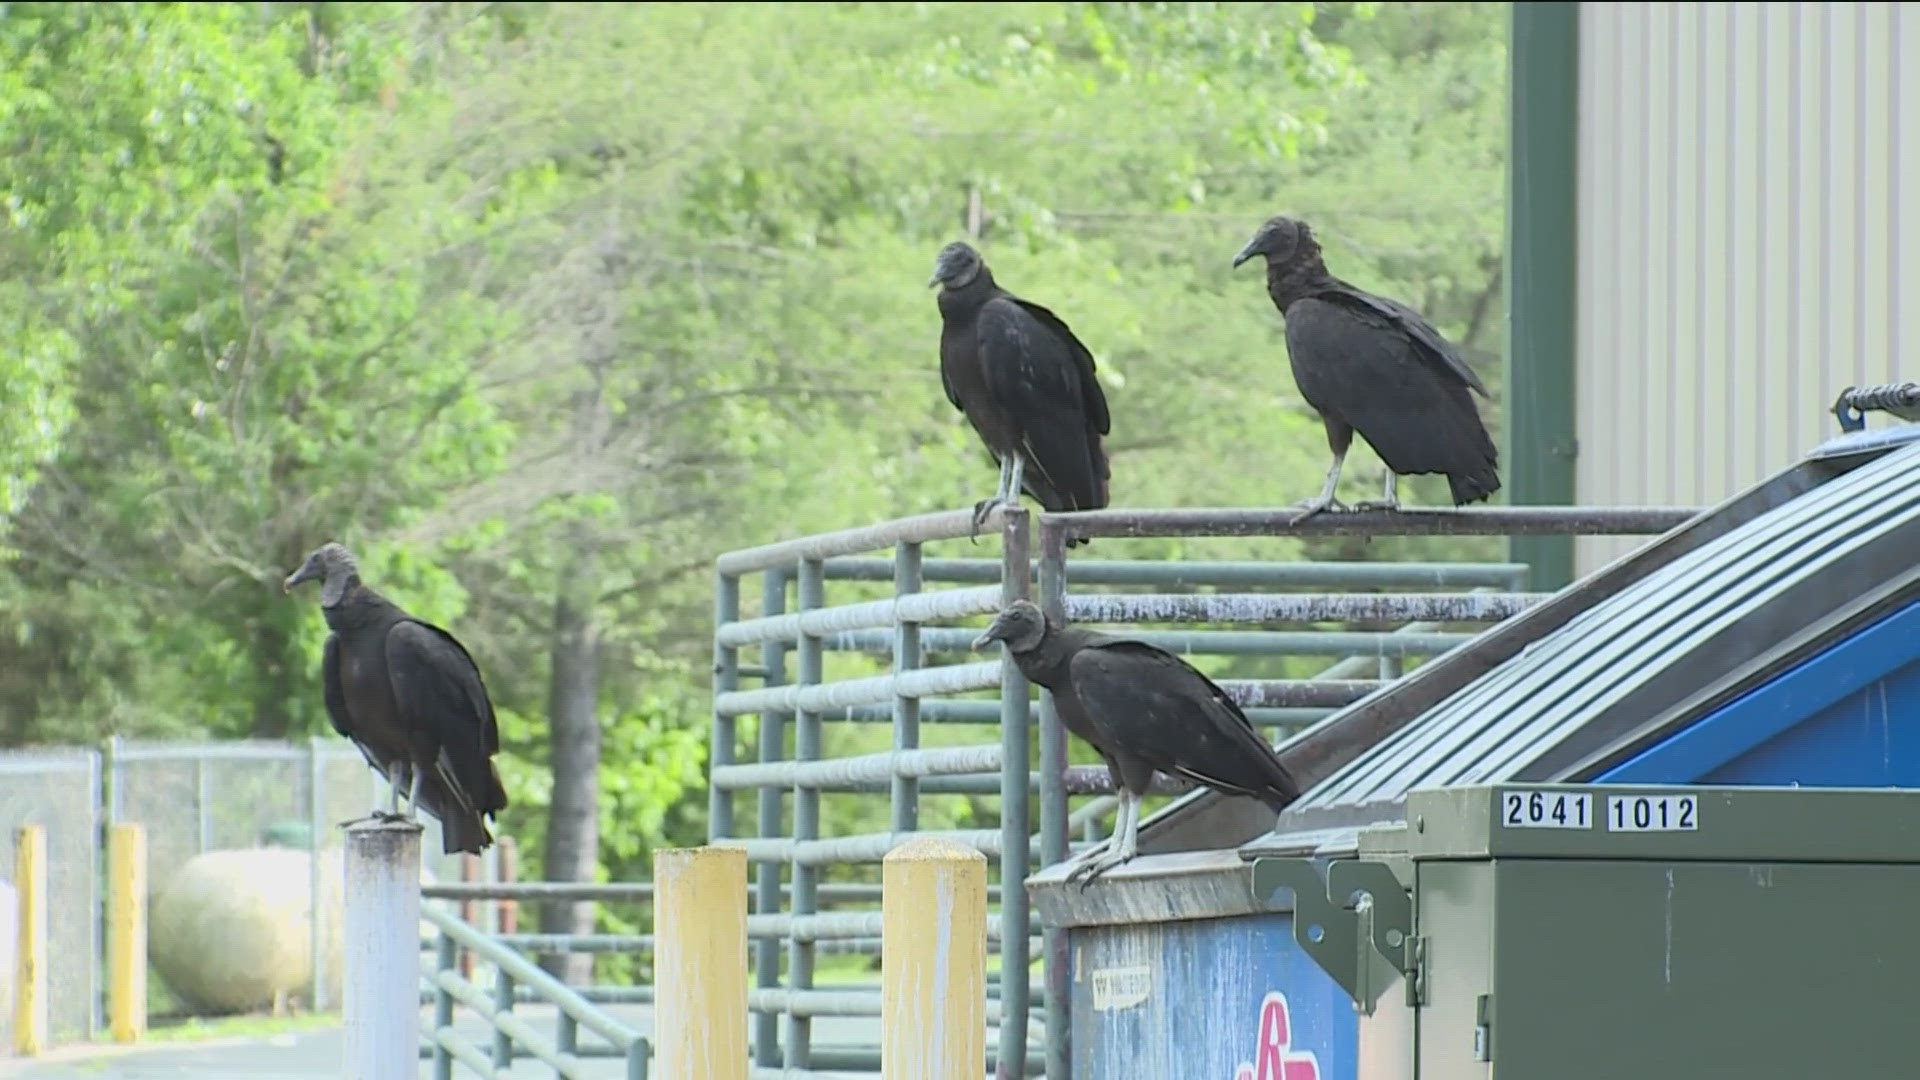 ARKANSAS GAME AND FISH COMMISSION IS ASKING YOU TO BE ON THE LOOKOUT FOR BLACK VULTURES...